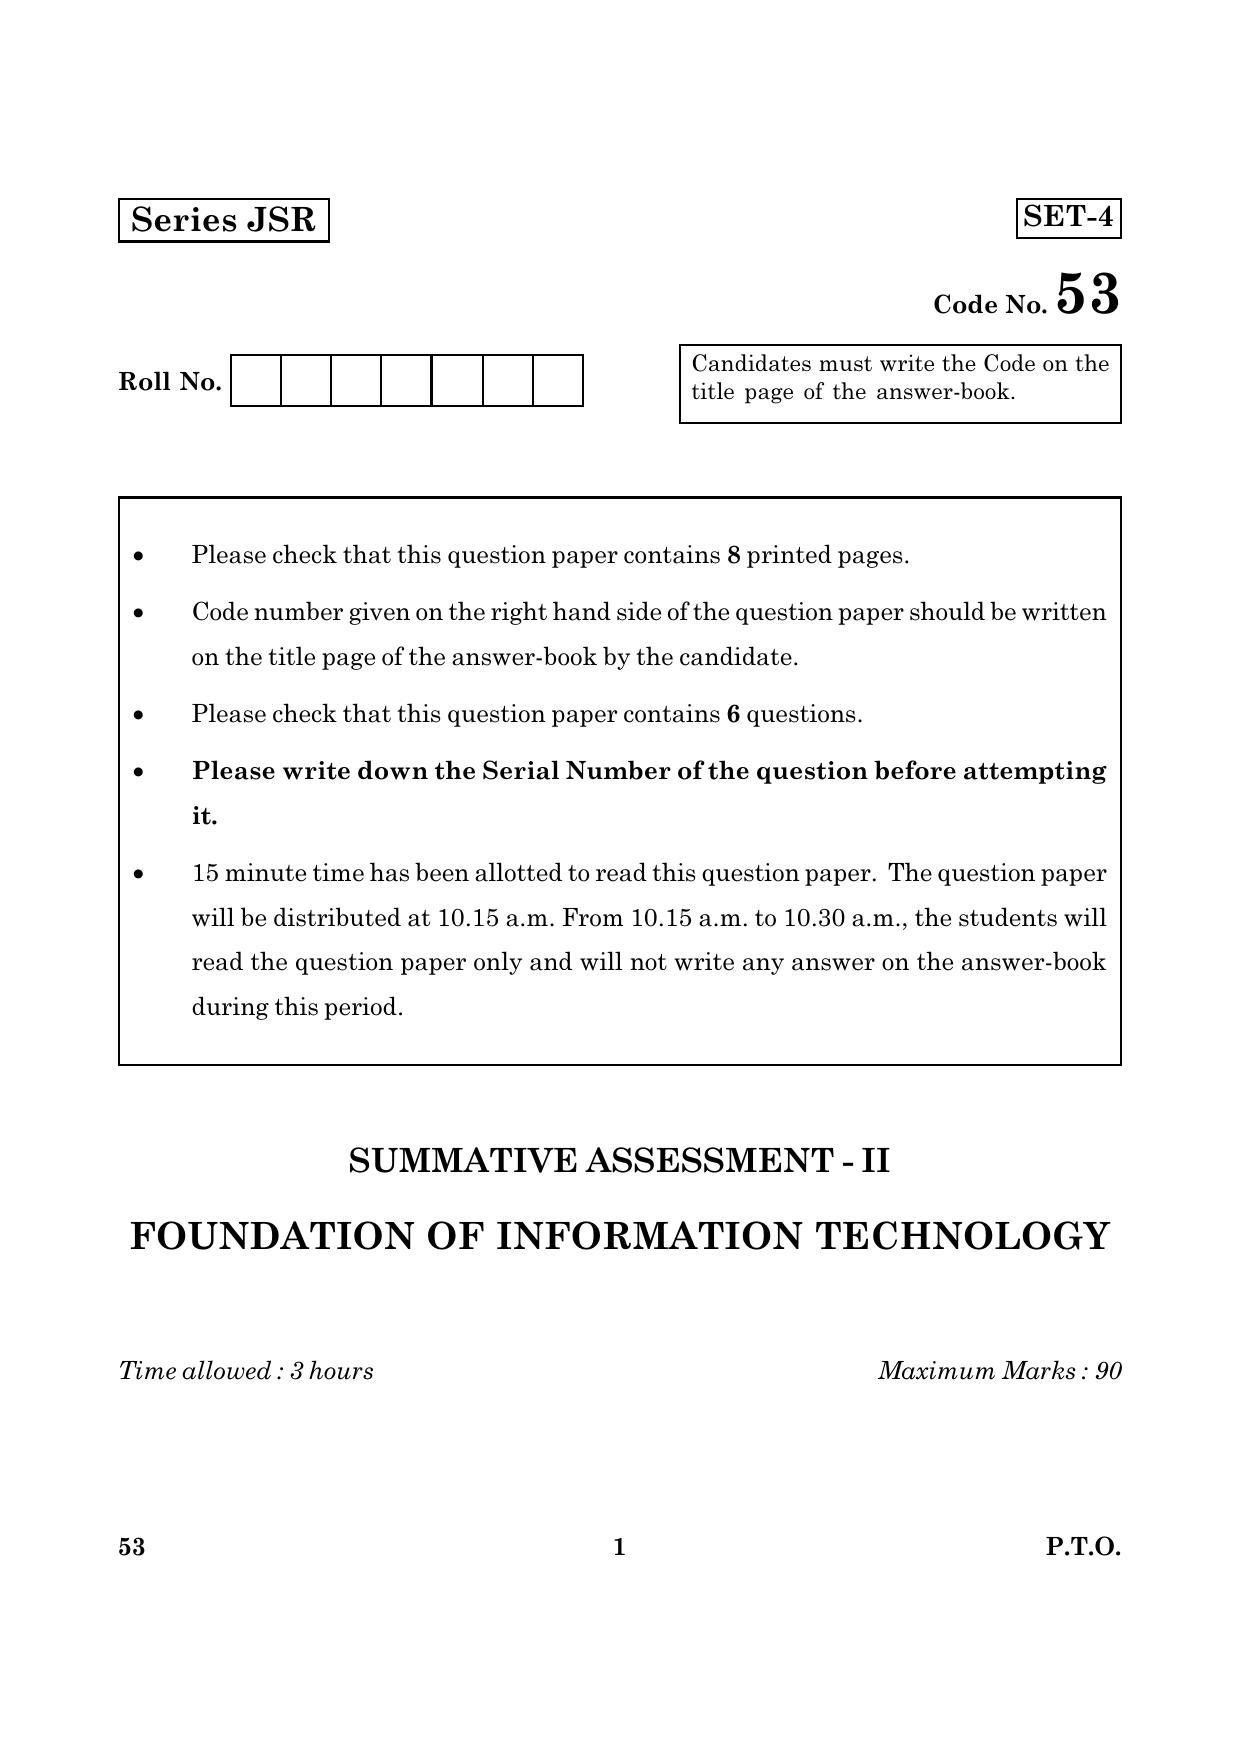 CBSE Class 10 053 Foundation Of Information Technology 2016 Question Paper - Page 1